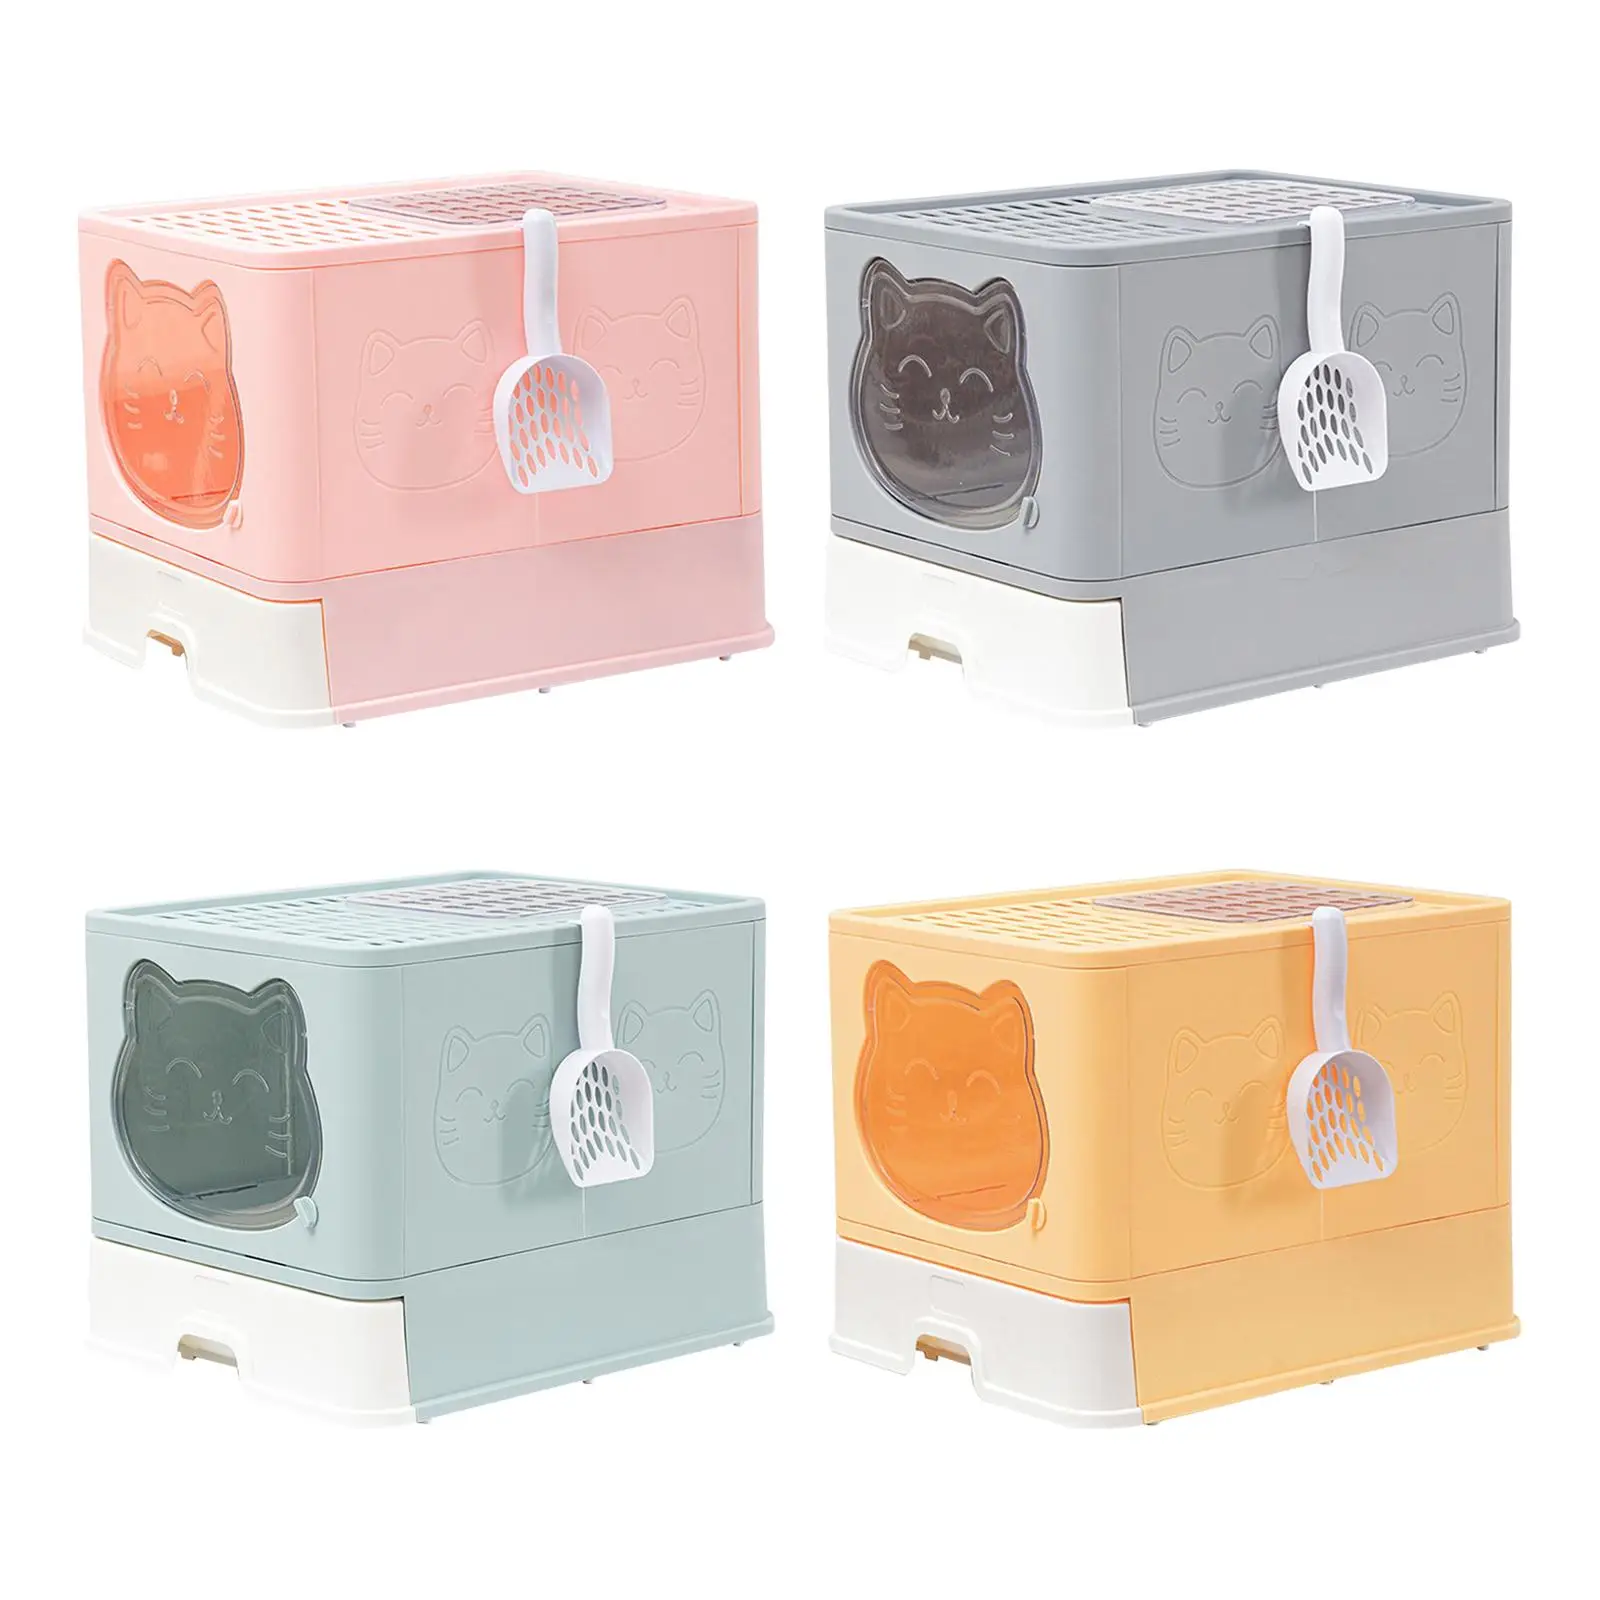 Cat Litter Box Kitten Toilet Foldable Fully Enclosed Front Door and Top Exit Hollow Holes AT The Top with Scoop Kitty Litter Pan